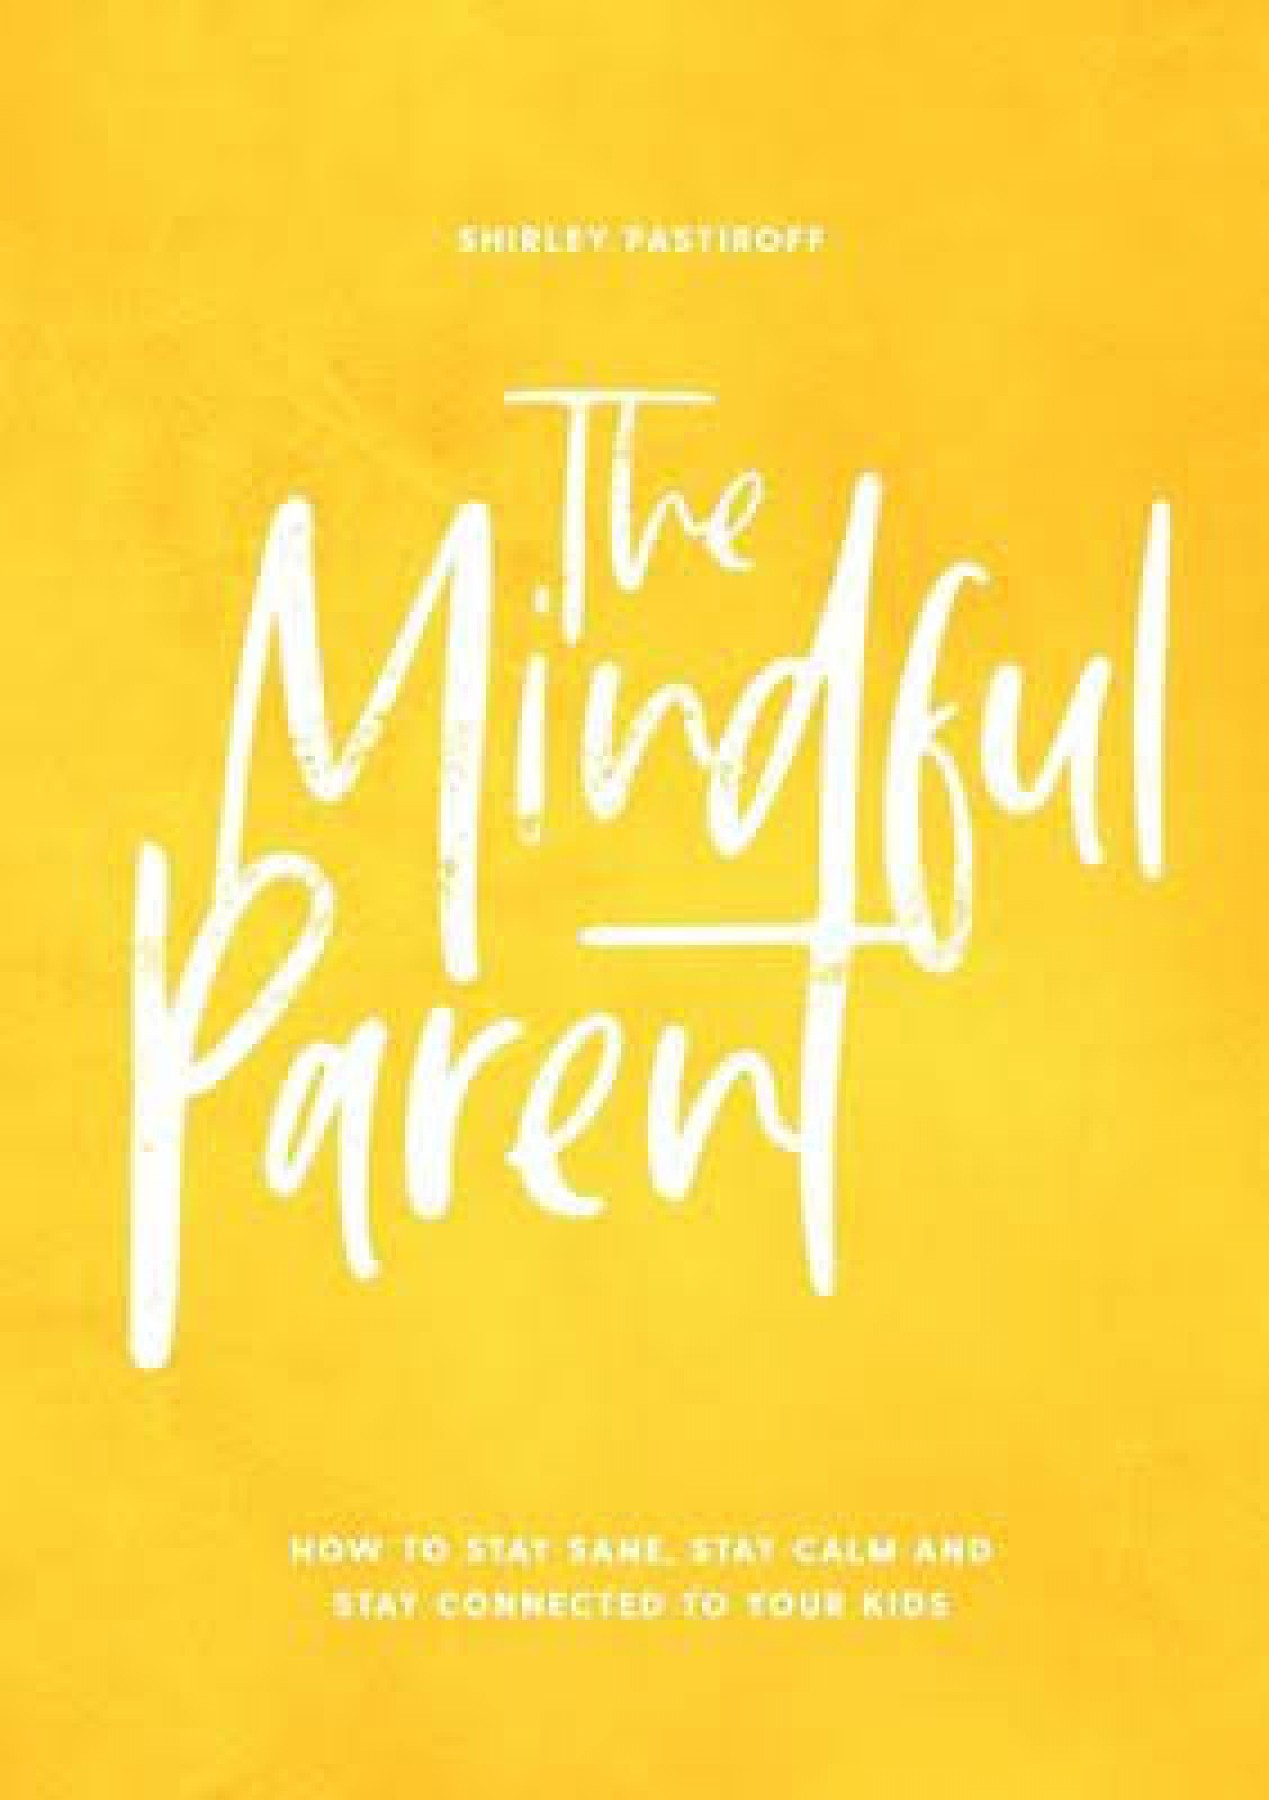 The mindful parent: How to stay sane, stay calm and stay connected to your kids